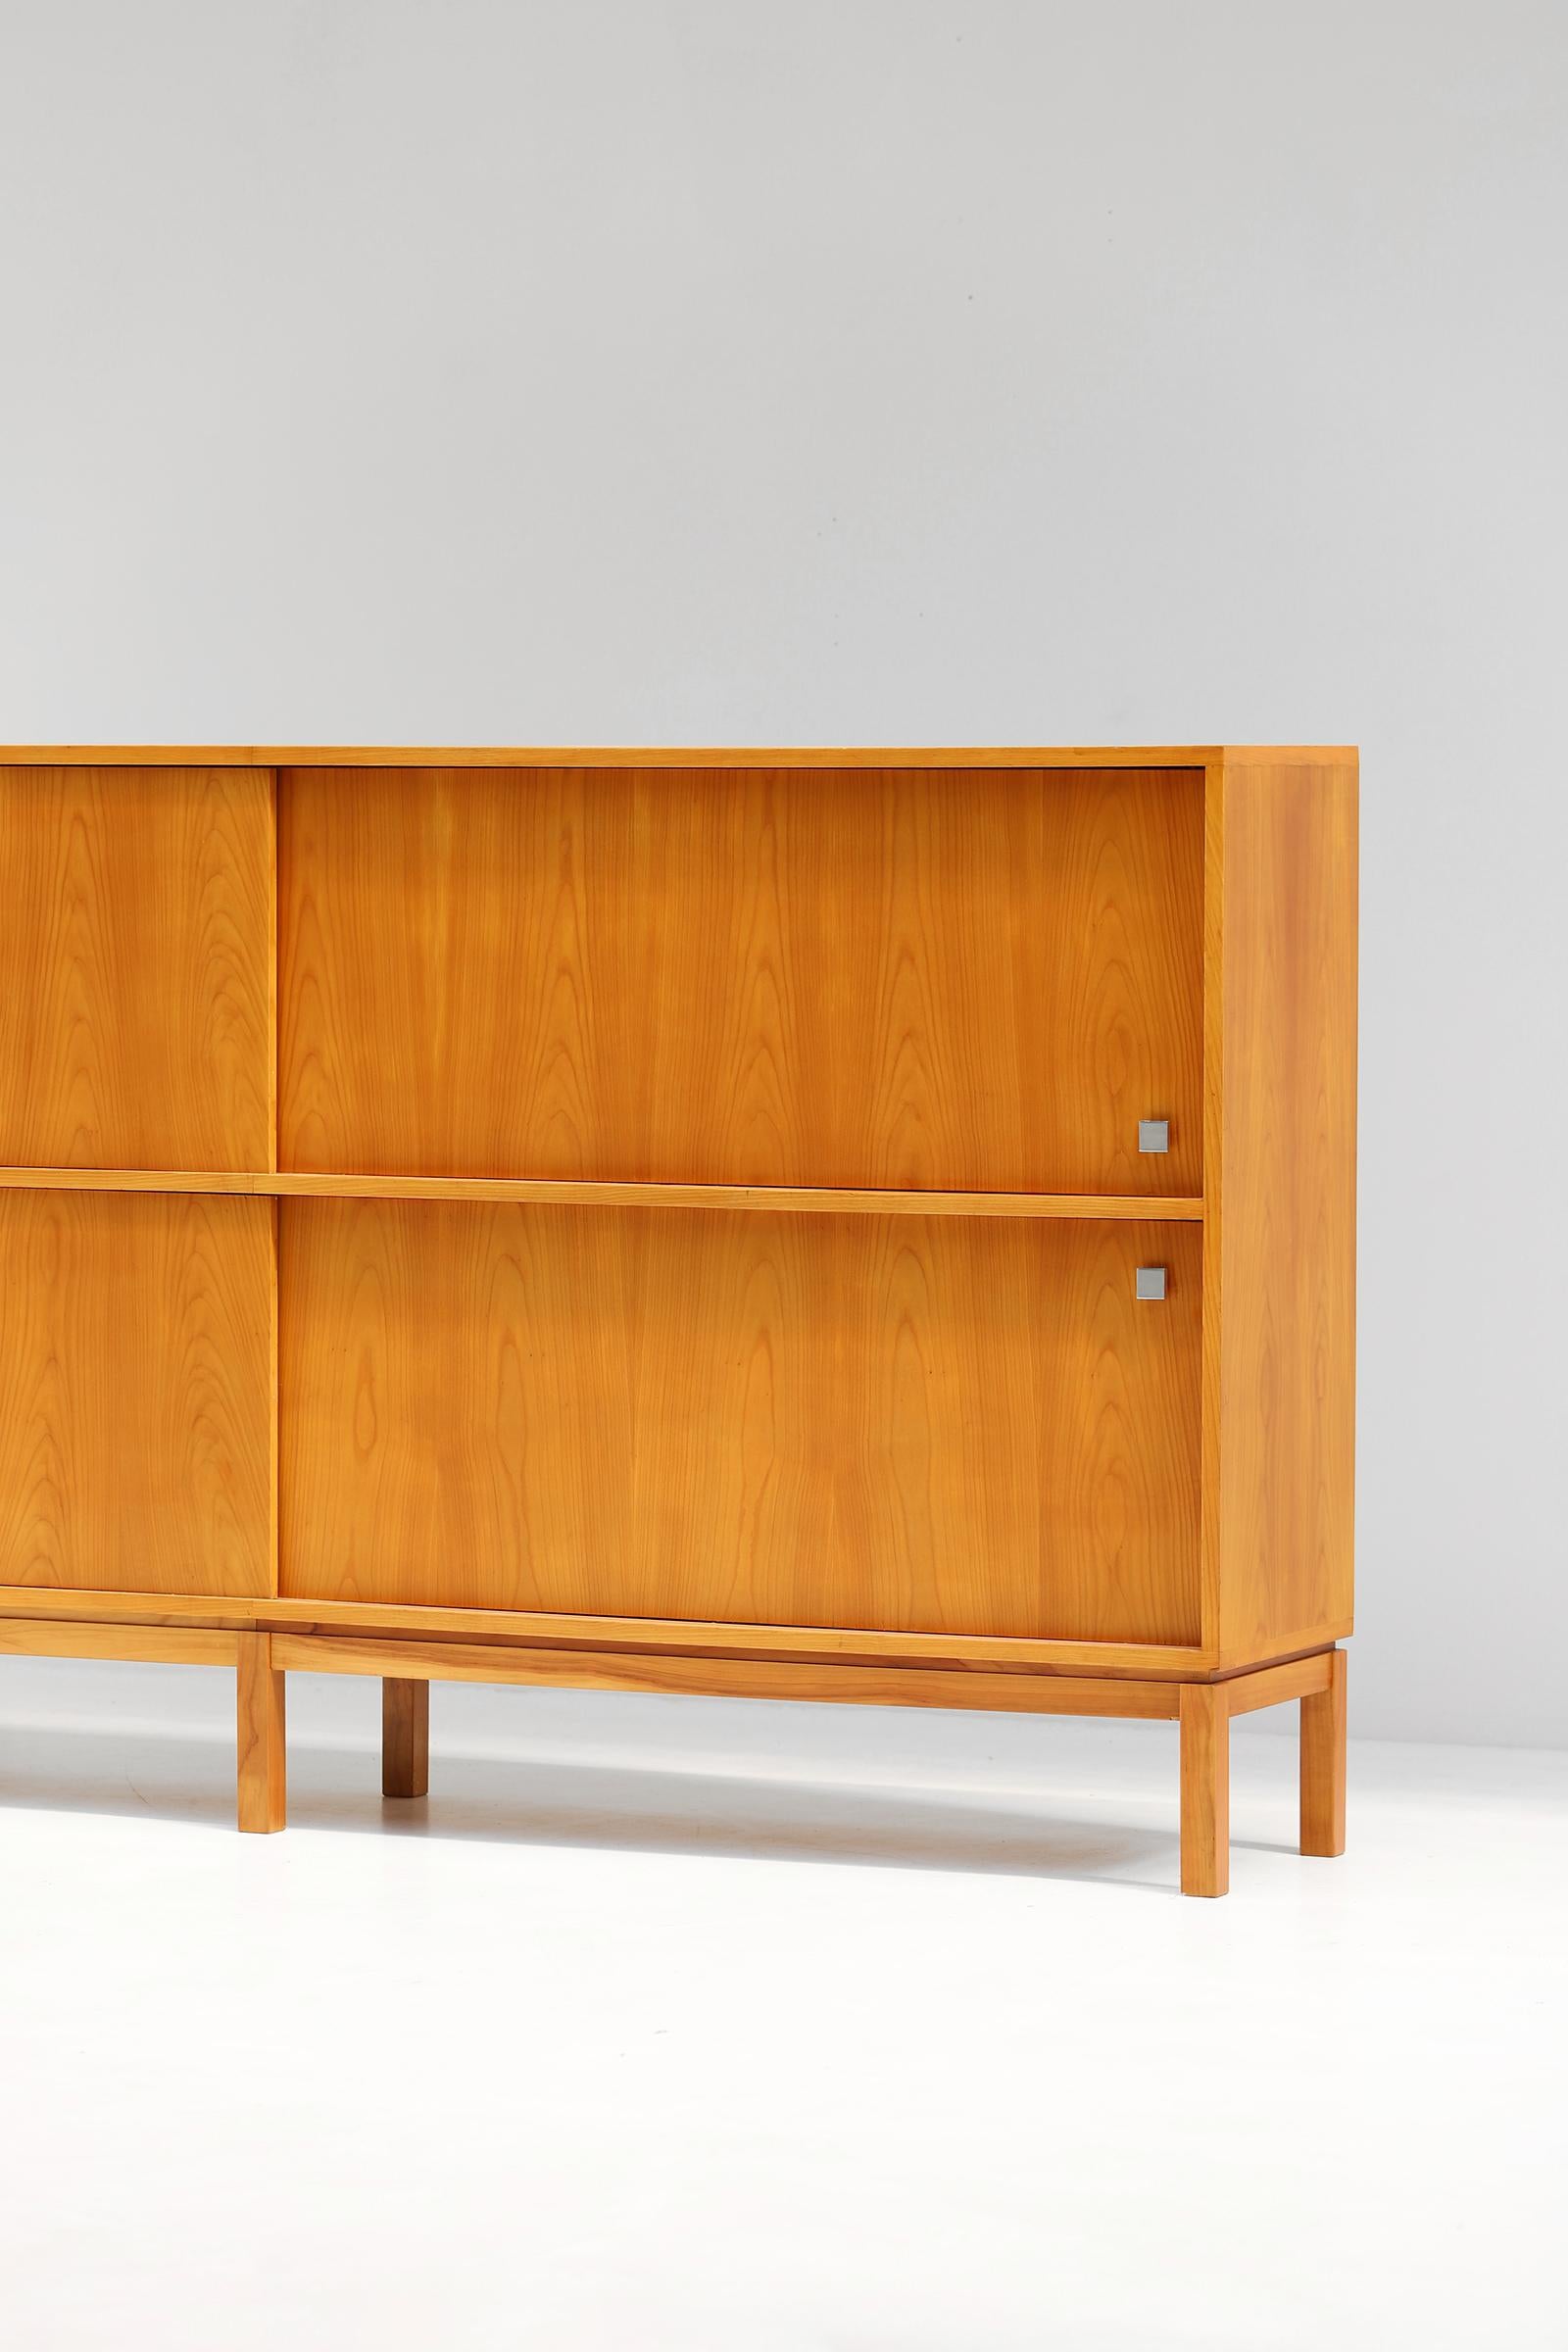 Large honeycolored highboard designed by Alfred Hendrickx for Belform in the 1960s. This spacious sideboard has 4 sliding doors with shelves and drawers behind. The doors are detailed with a square steel handle. The honey color brightens the design,